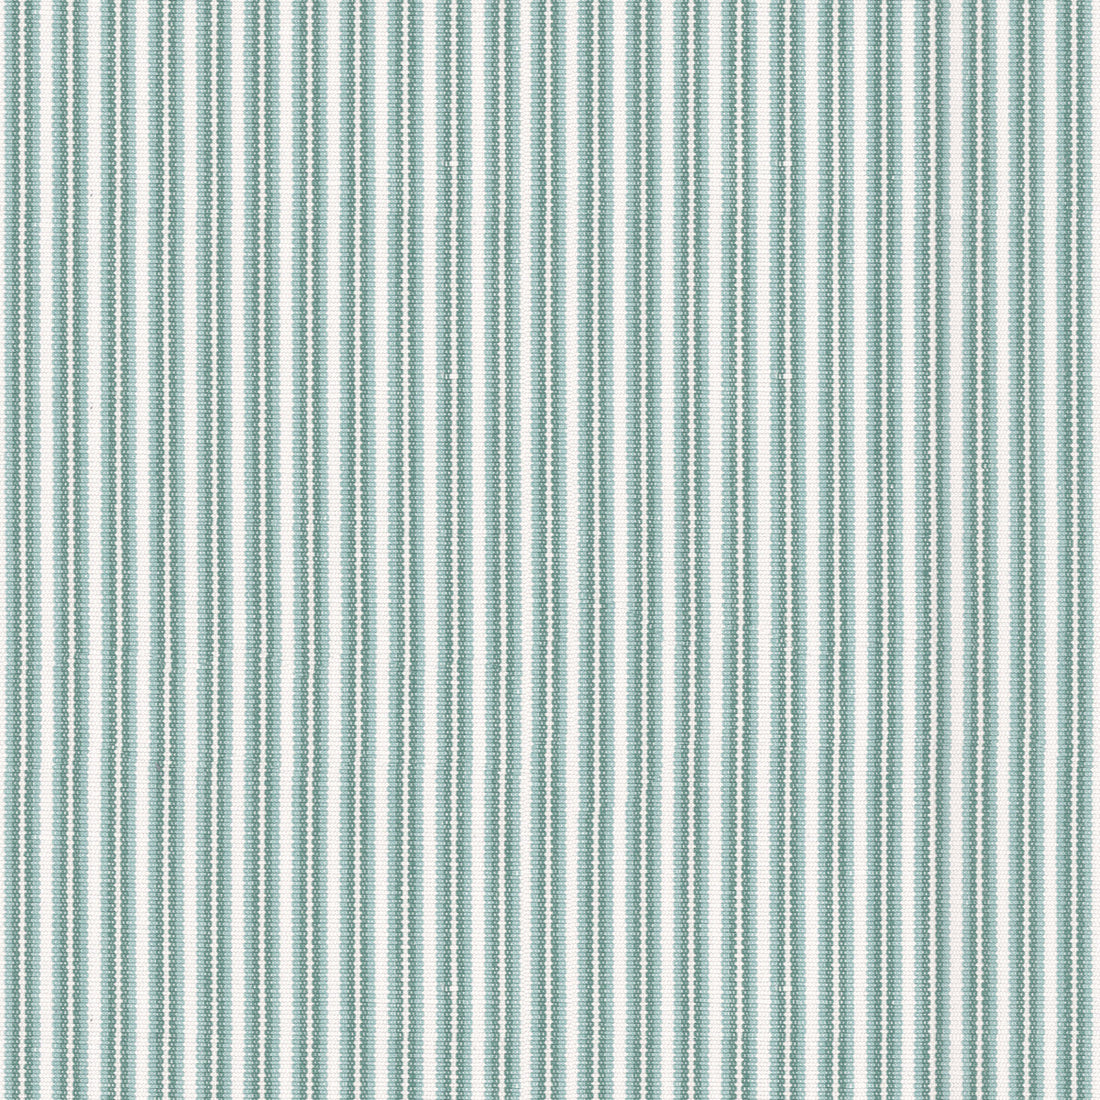 Chamas Stripe fabric in teal color - pattern 8017103.133.0 - by Brunschwig &amp; Fils in the Durance collection